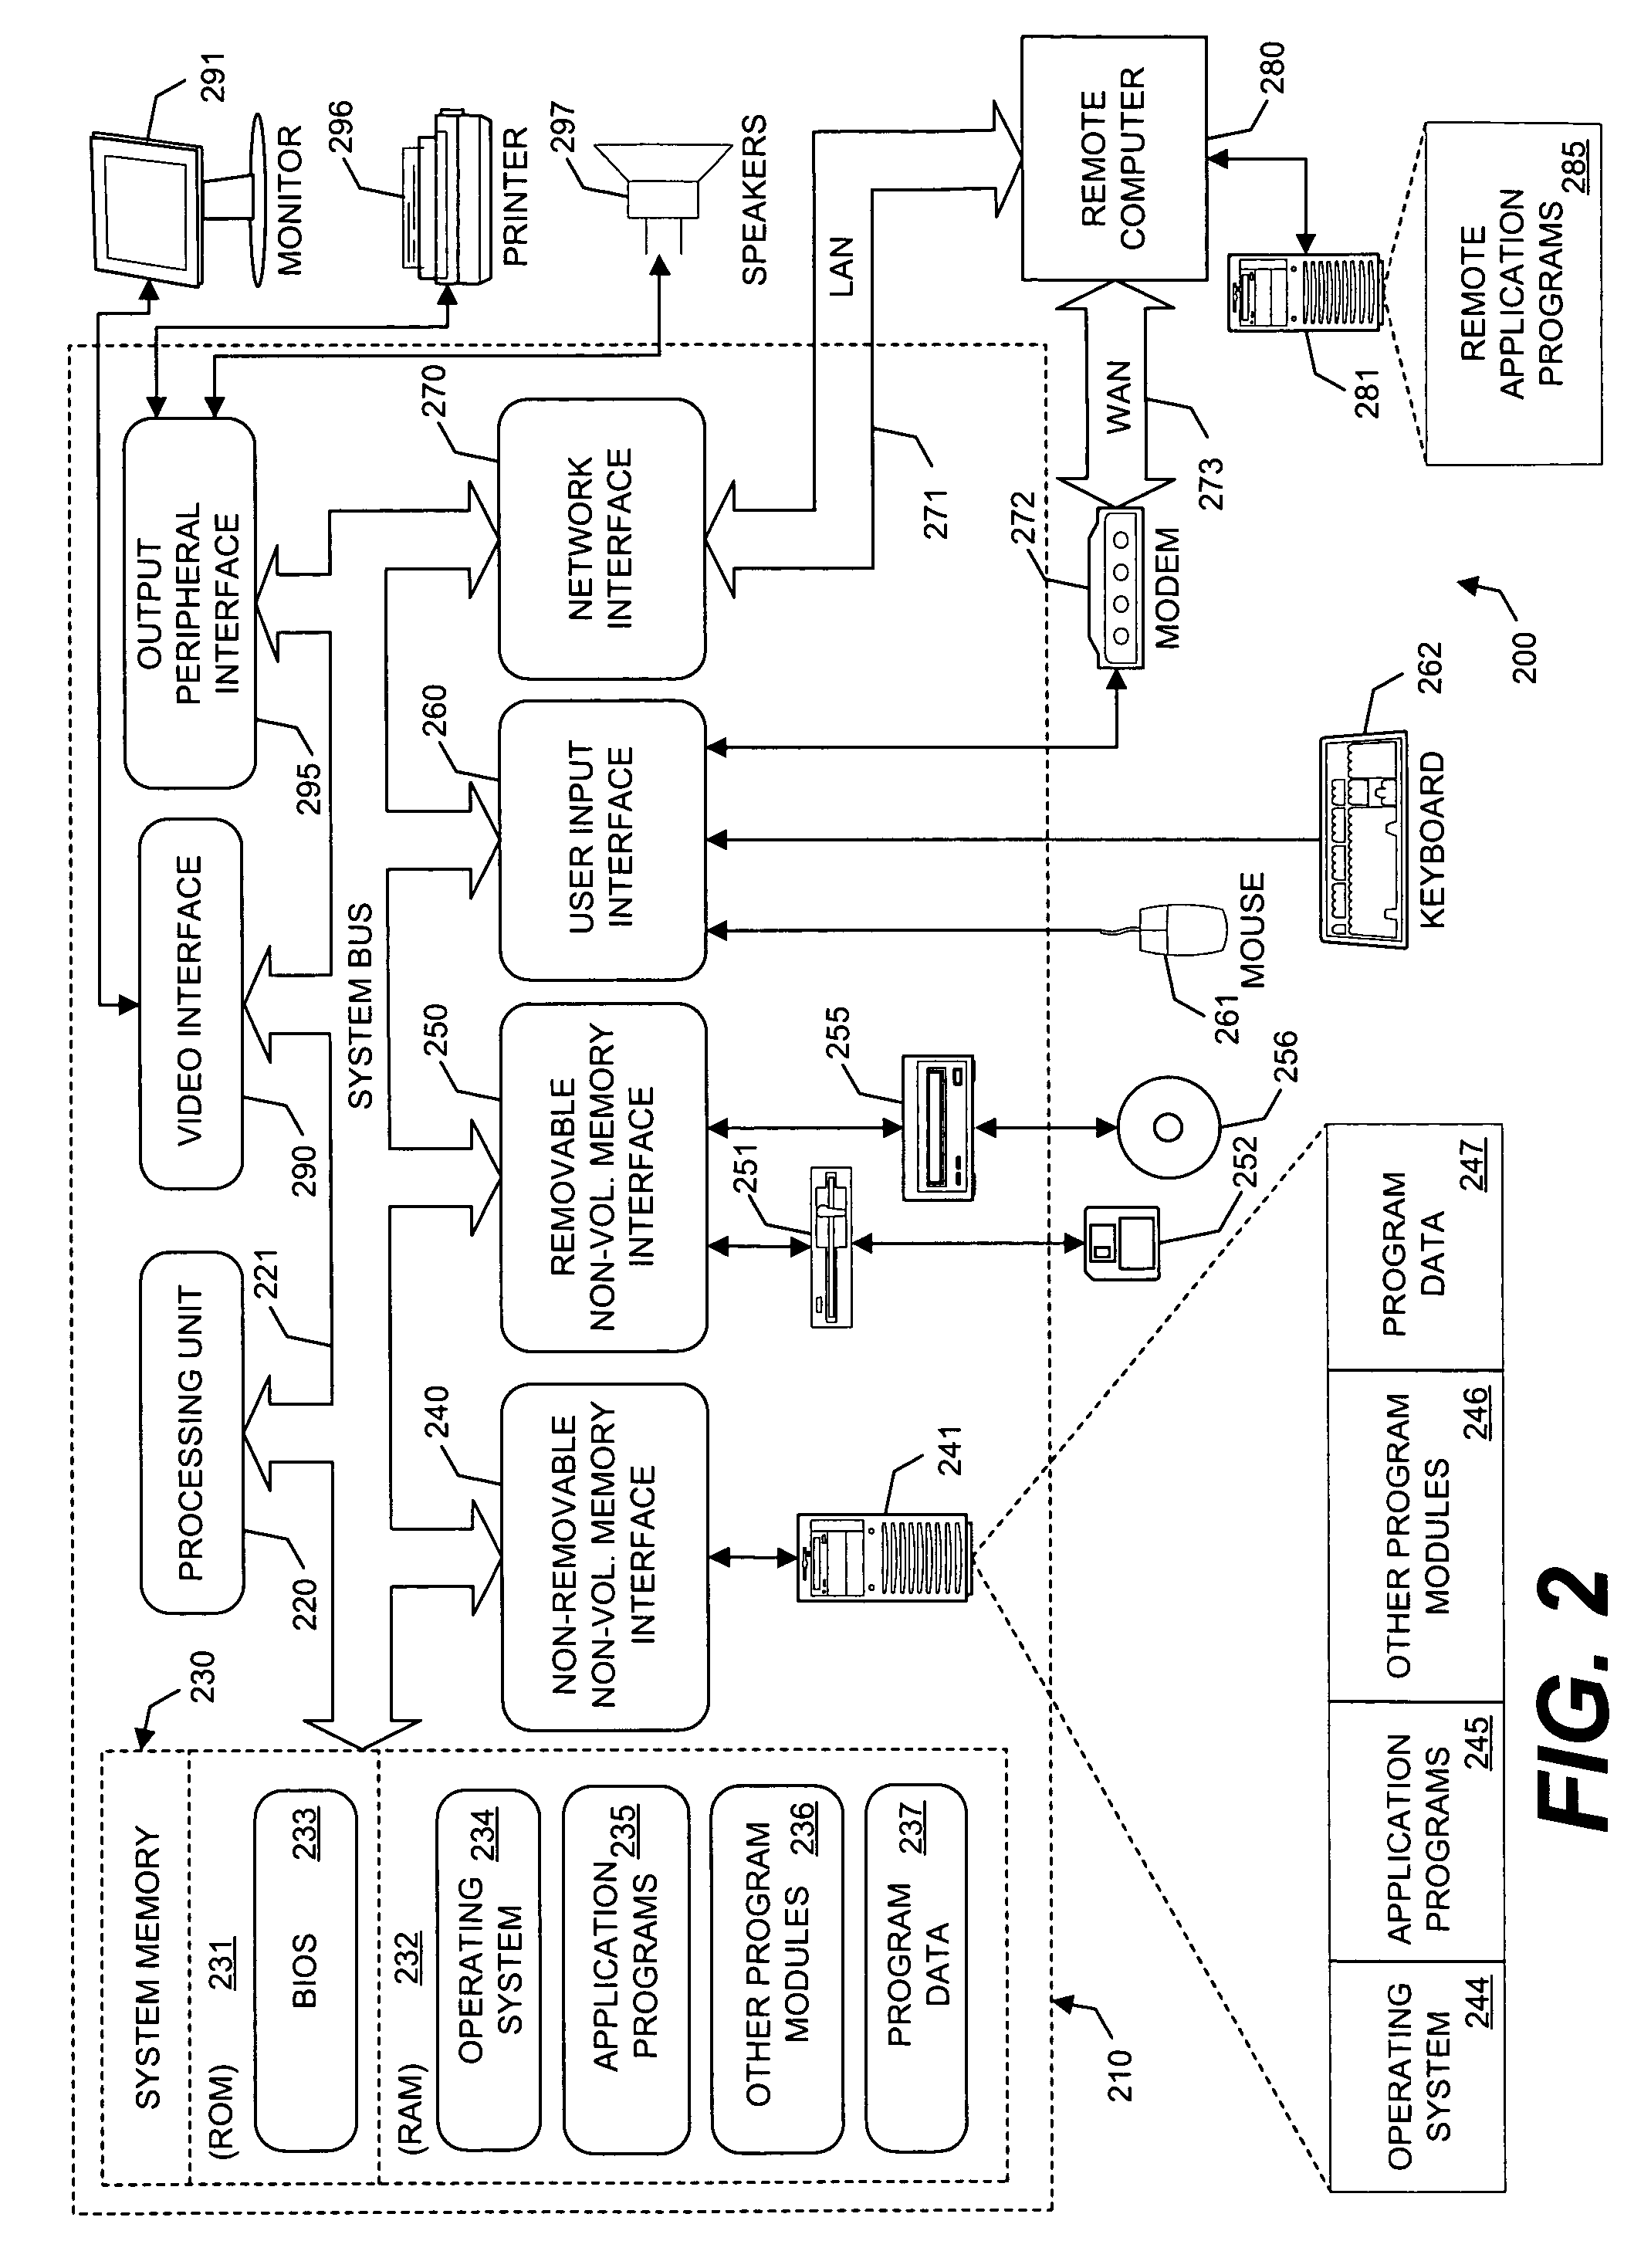 System and methods for facilitating adaptive grid-based document layout